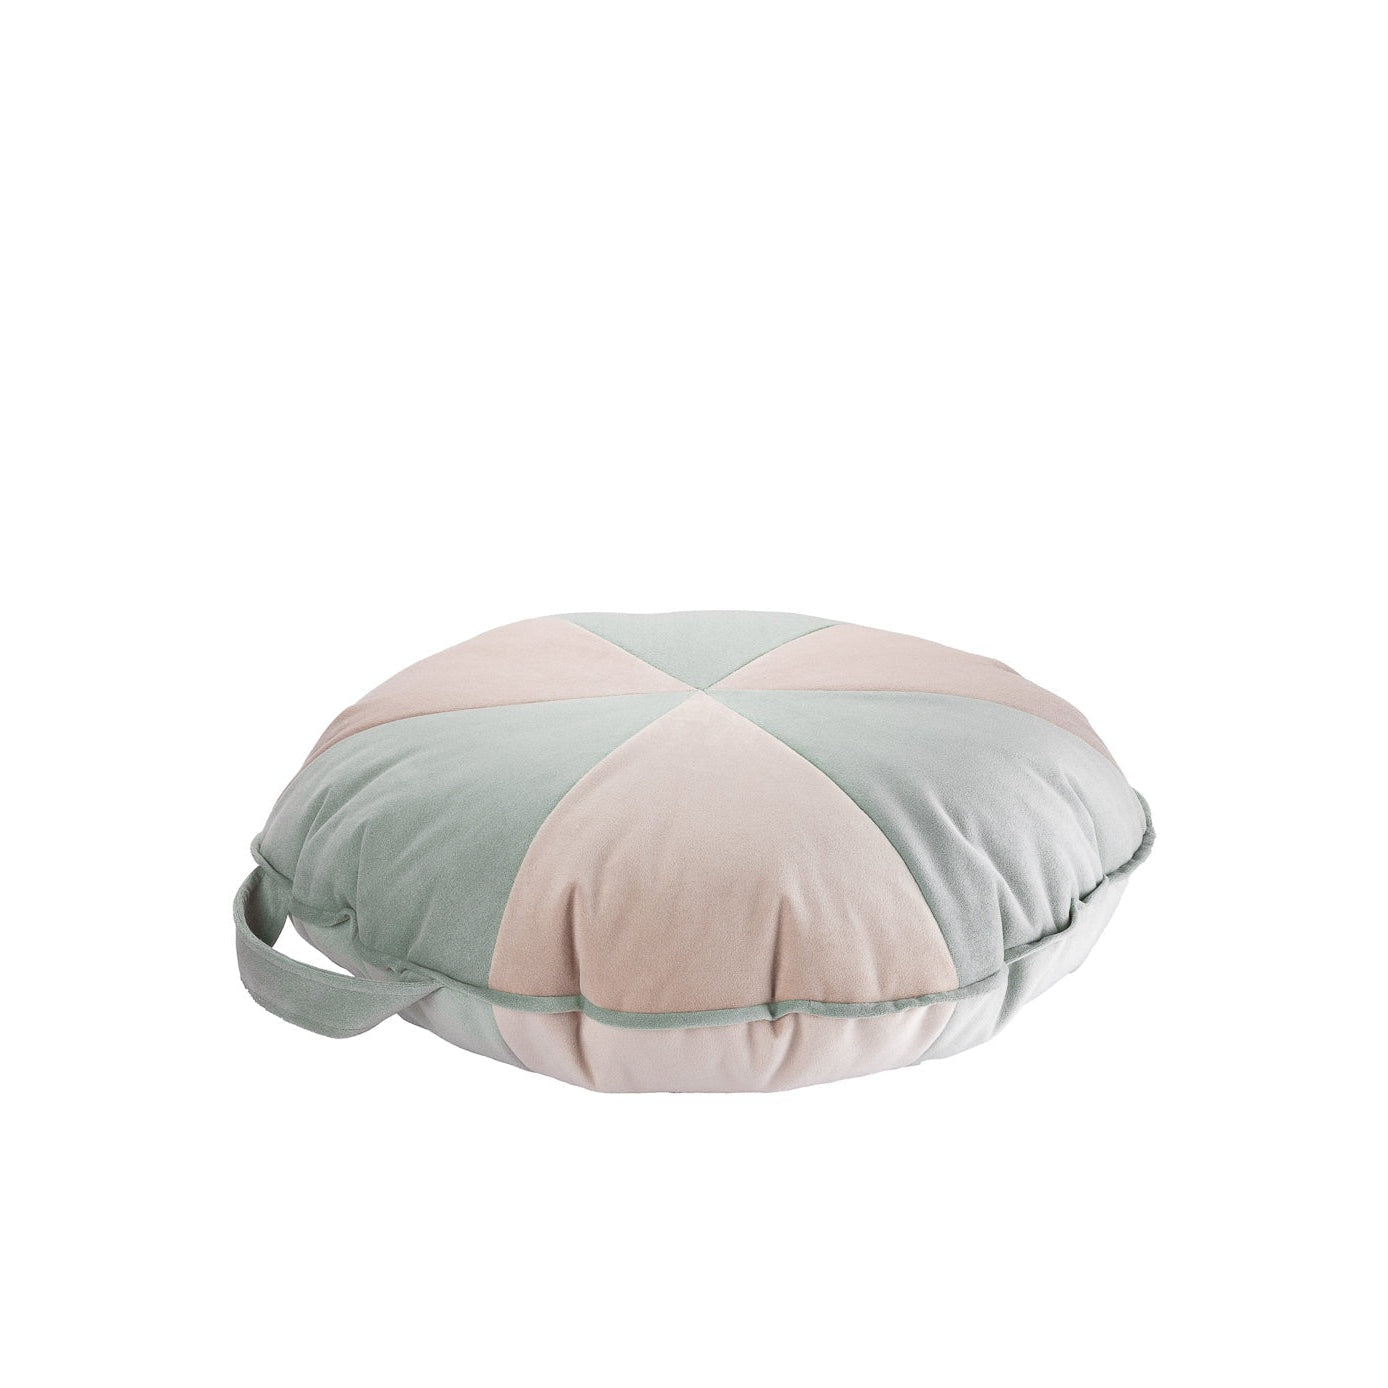 Wigiwama Cookie Beanbag Misty Green & Dusty Beige at Rugs by Roo